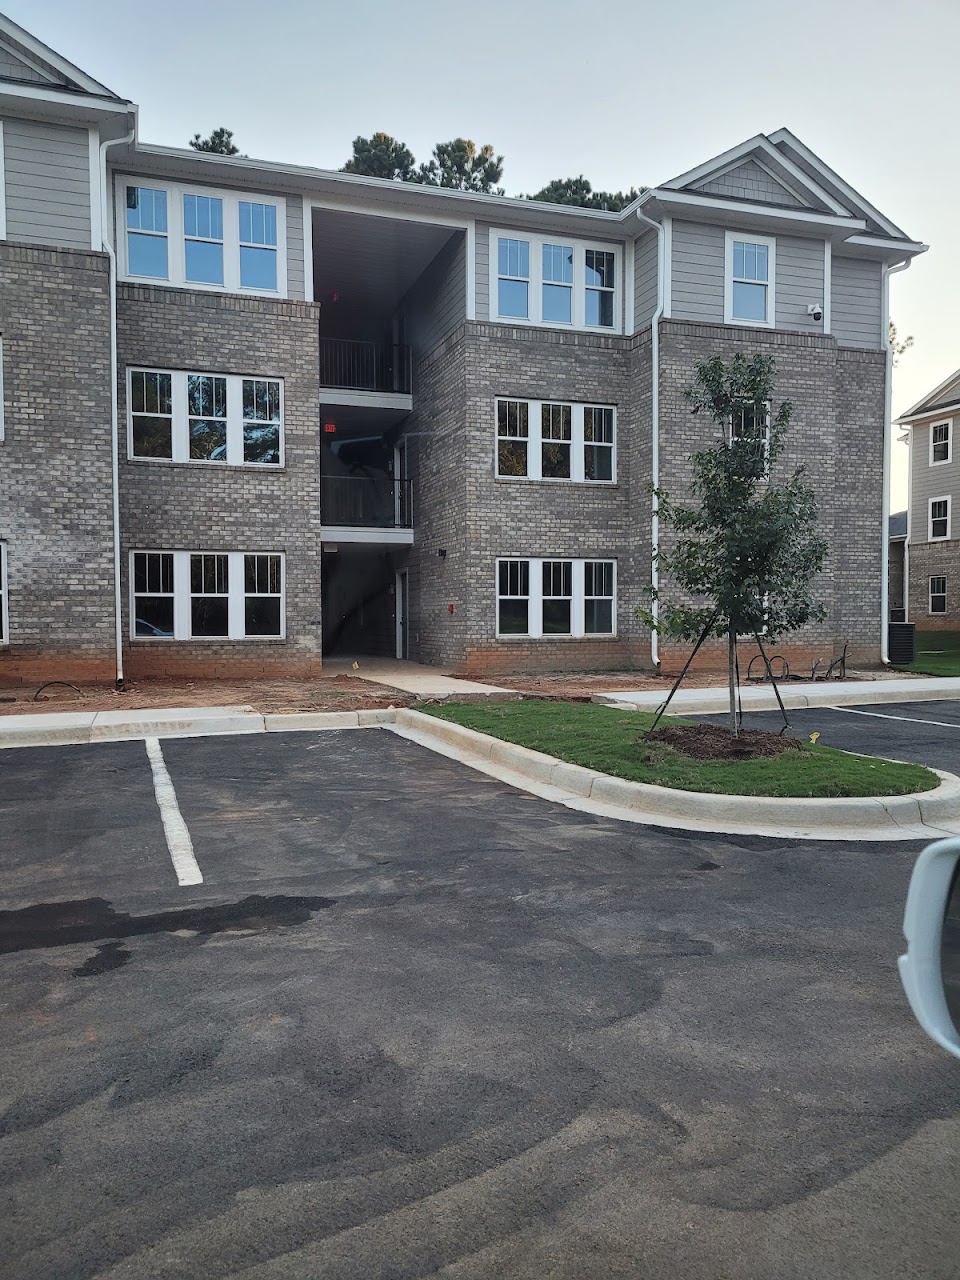 Photo of DOVE PLACE. Affordable housing located at 150 DAPHNE ROAD COLUMBIA, SC 29209